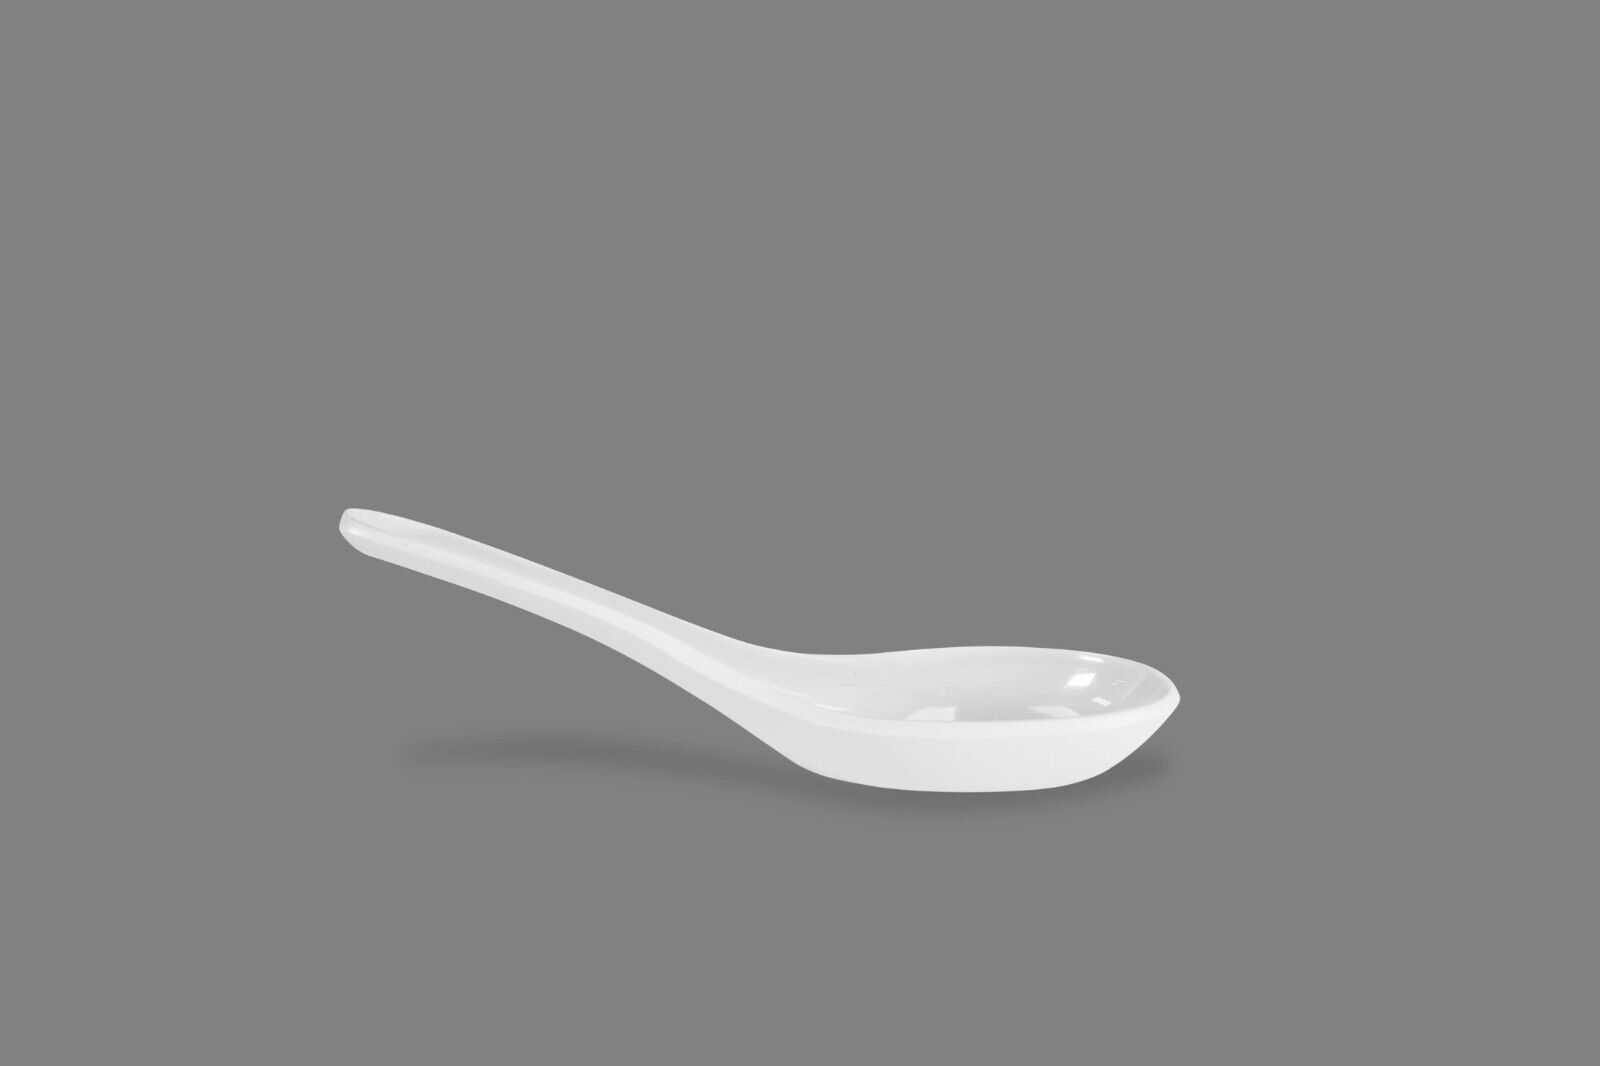 Porcelain White Spoon Set for Everyday Dining and Special Occasions